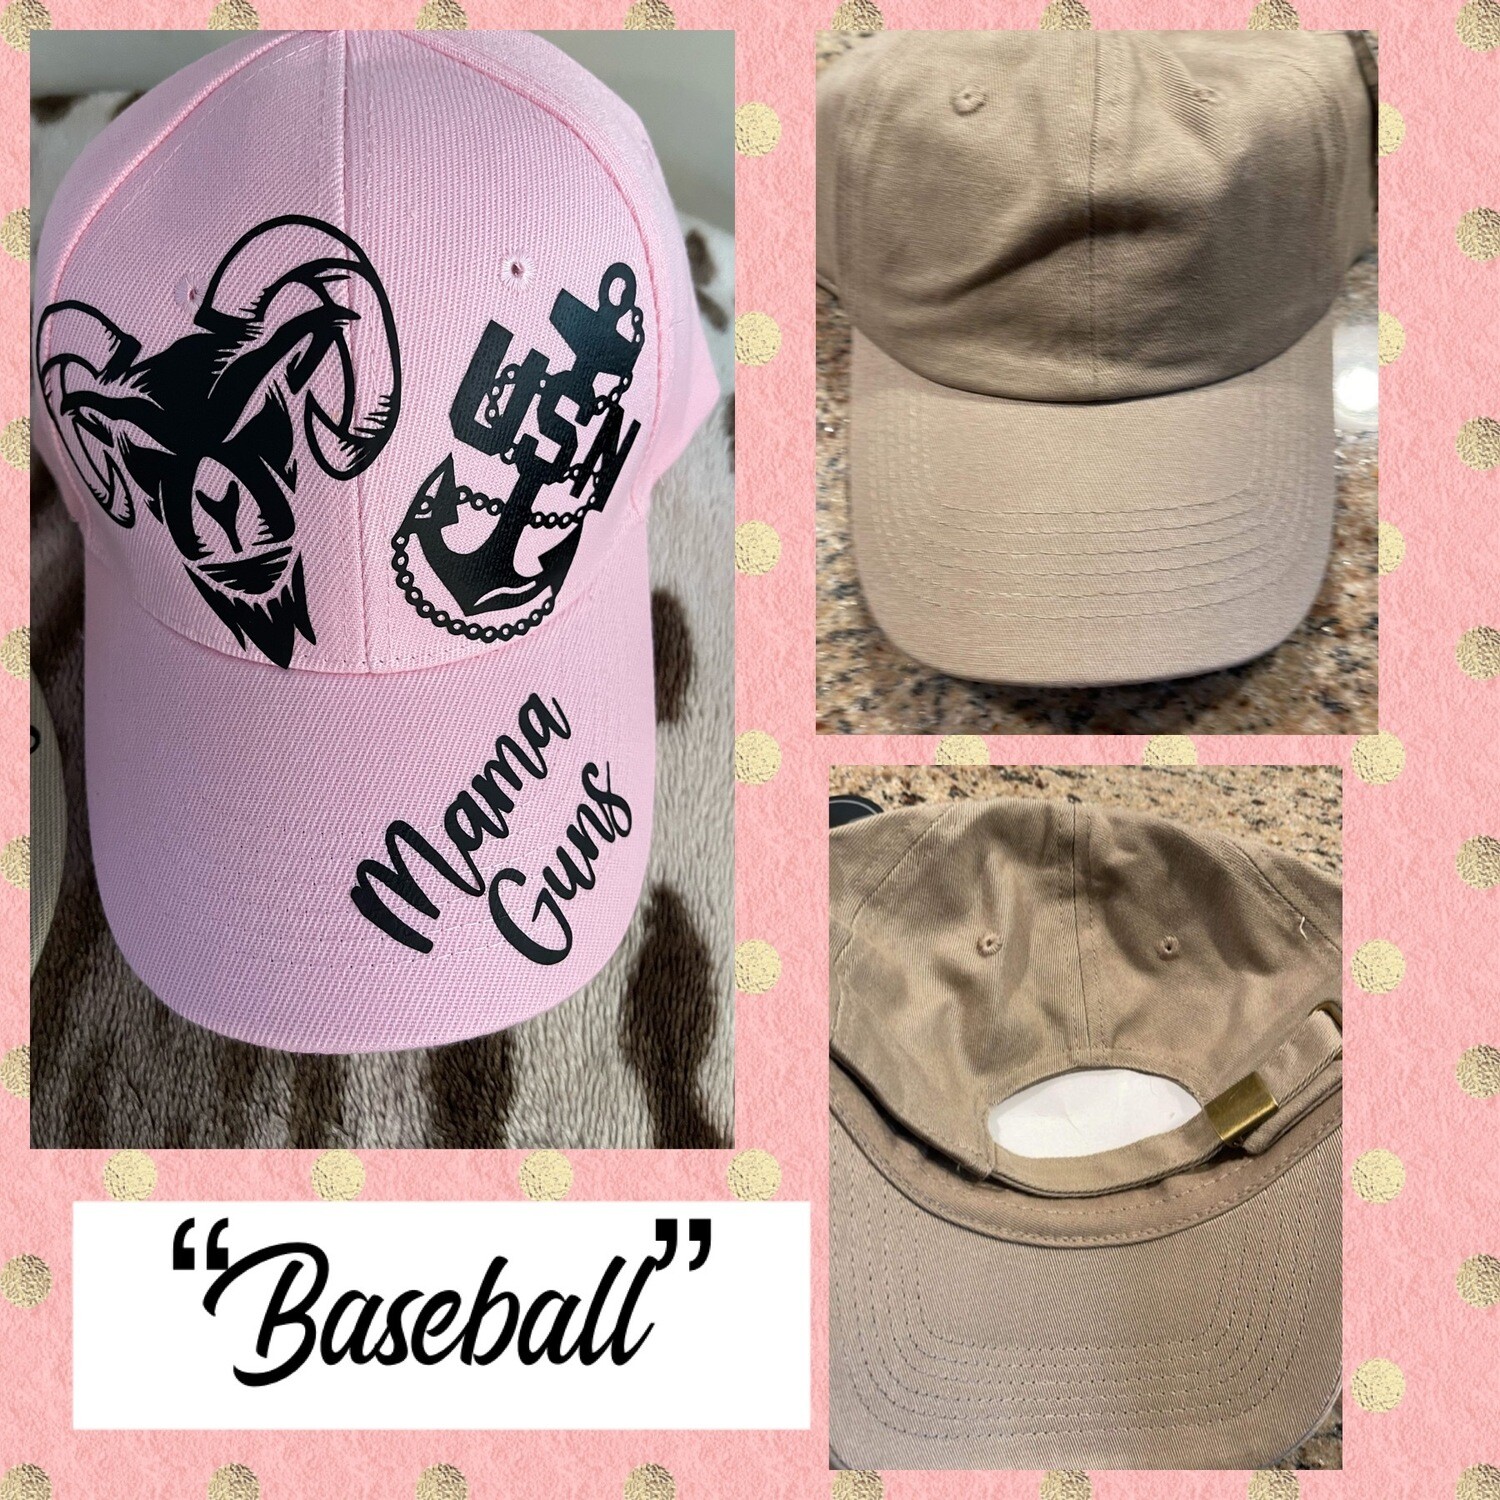 Baseball Hat *please allow 4-5 days after order placed for us to ship.